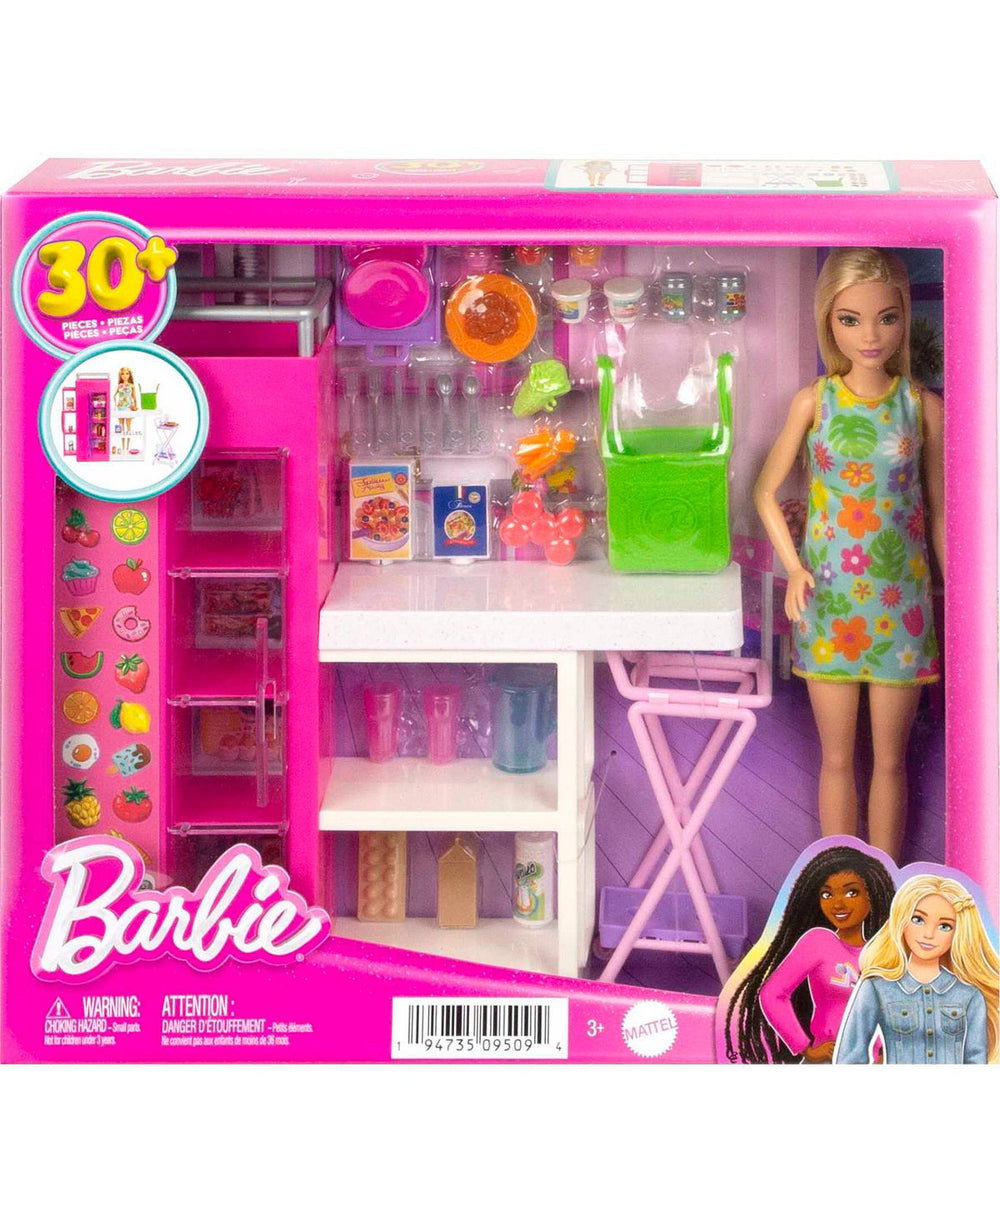 Barbie Doll and Ultimate Pantry Play Set, Barbie Kitchen Add-on With 30+ Food-Themed Pieces